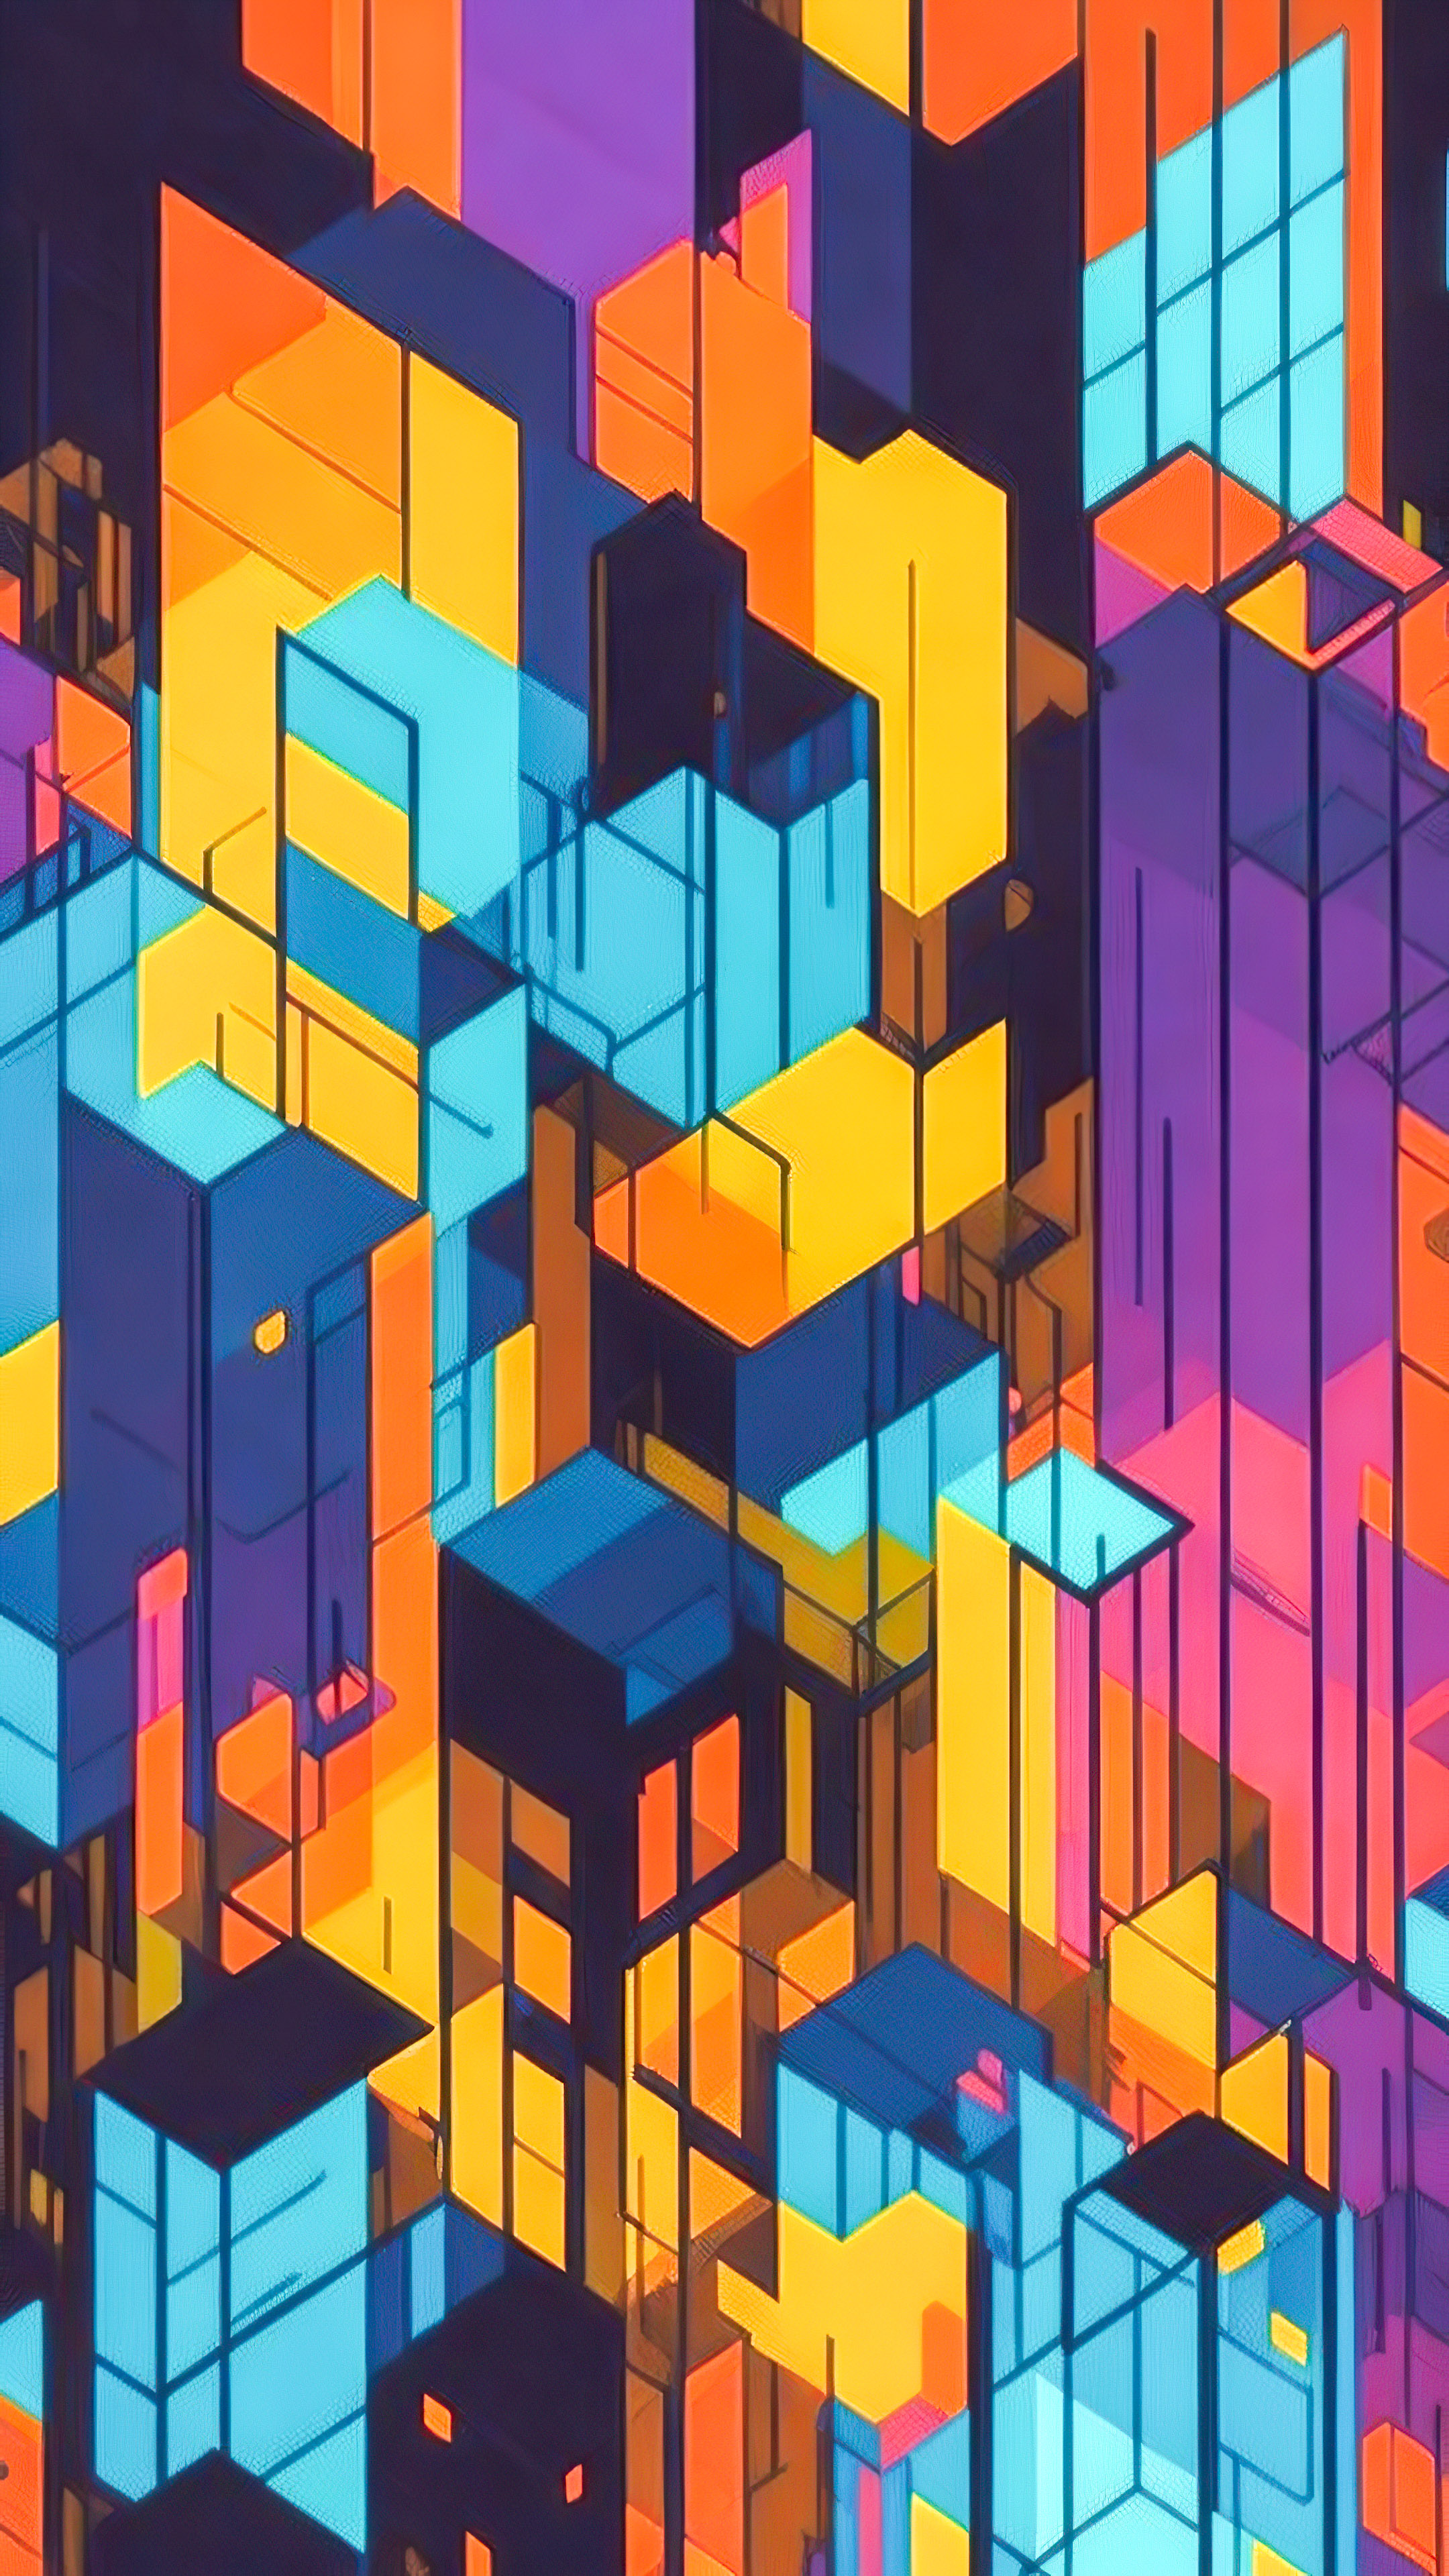 Enhance your iPhone with colorful abstract wallpaper 4K, capturing the geometric abstraction of New York City.